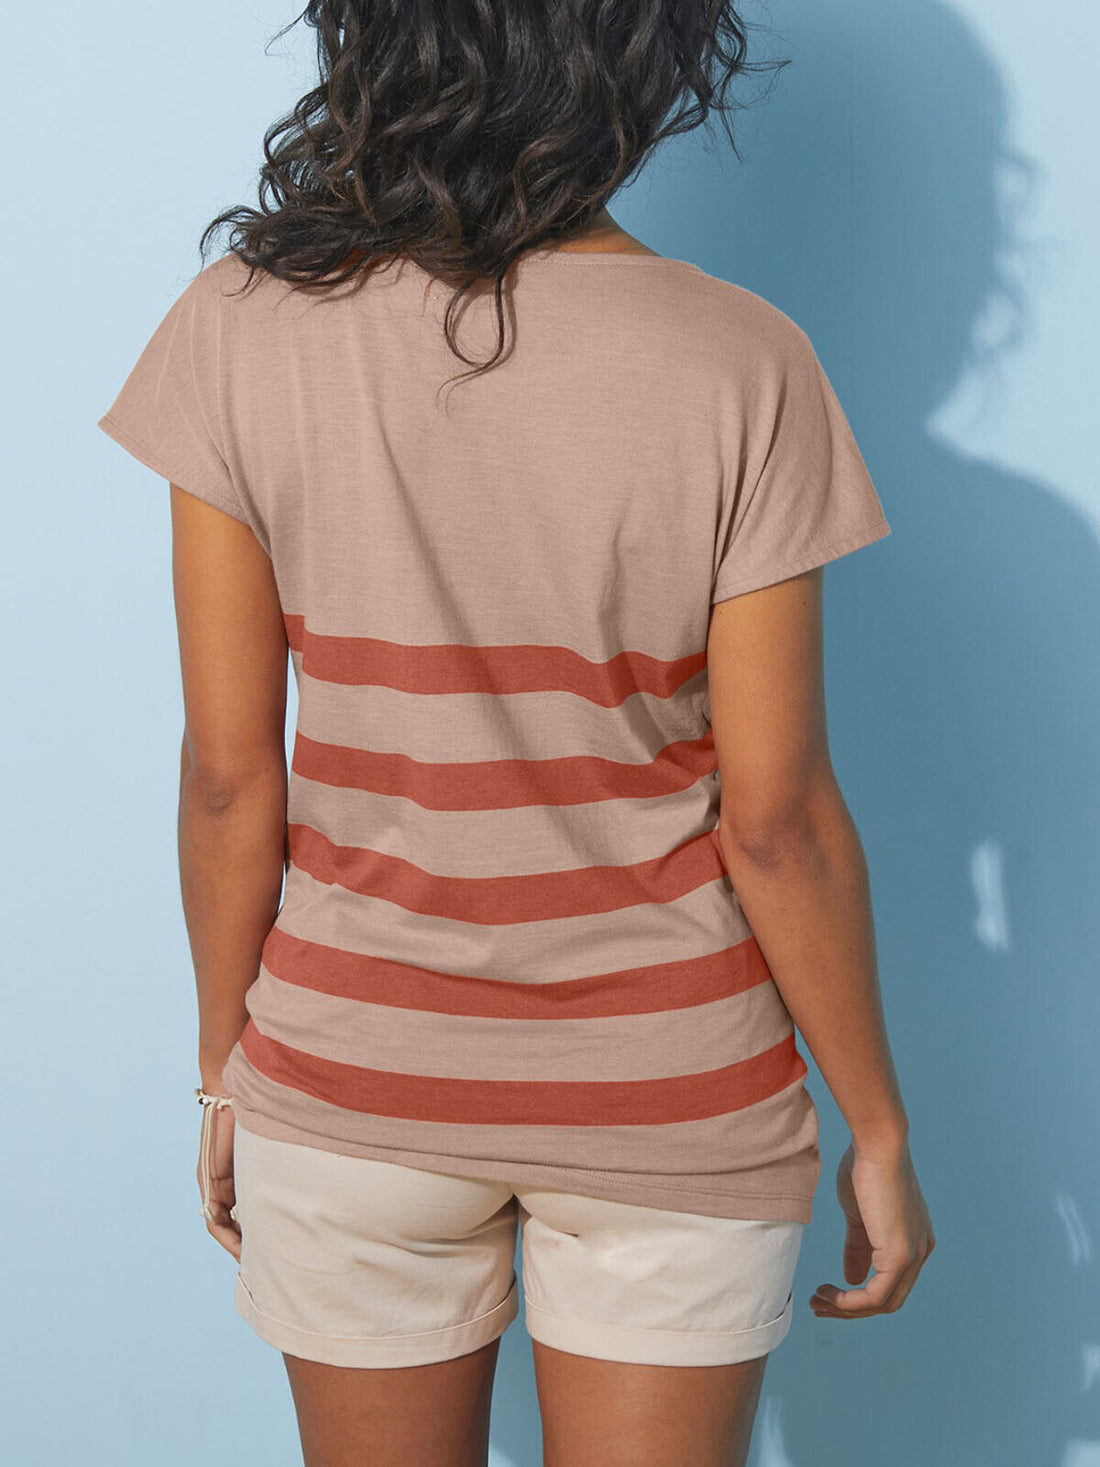 Blancheporte Taupe Striped Button Shoulder T-Shirt in Sizes 14/16, 18/20, 24, 26